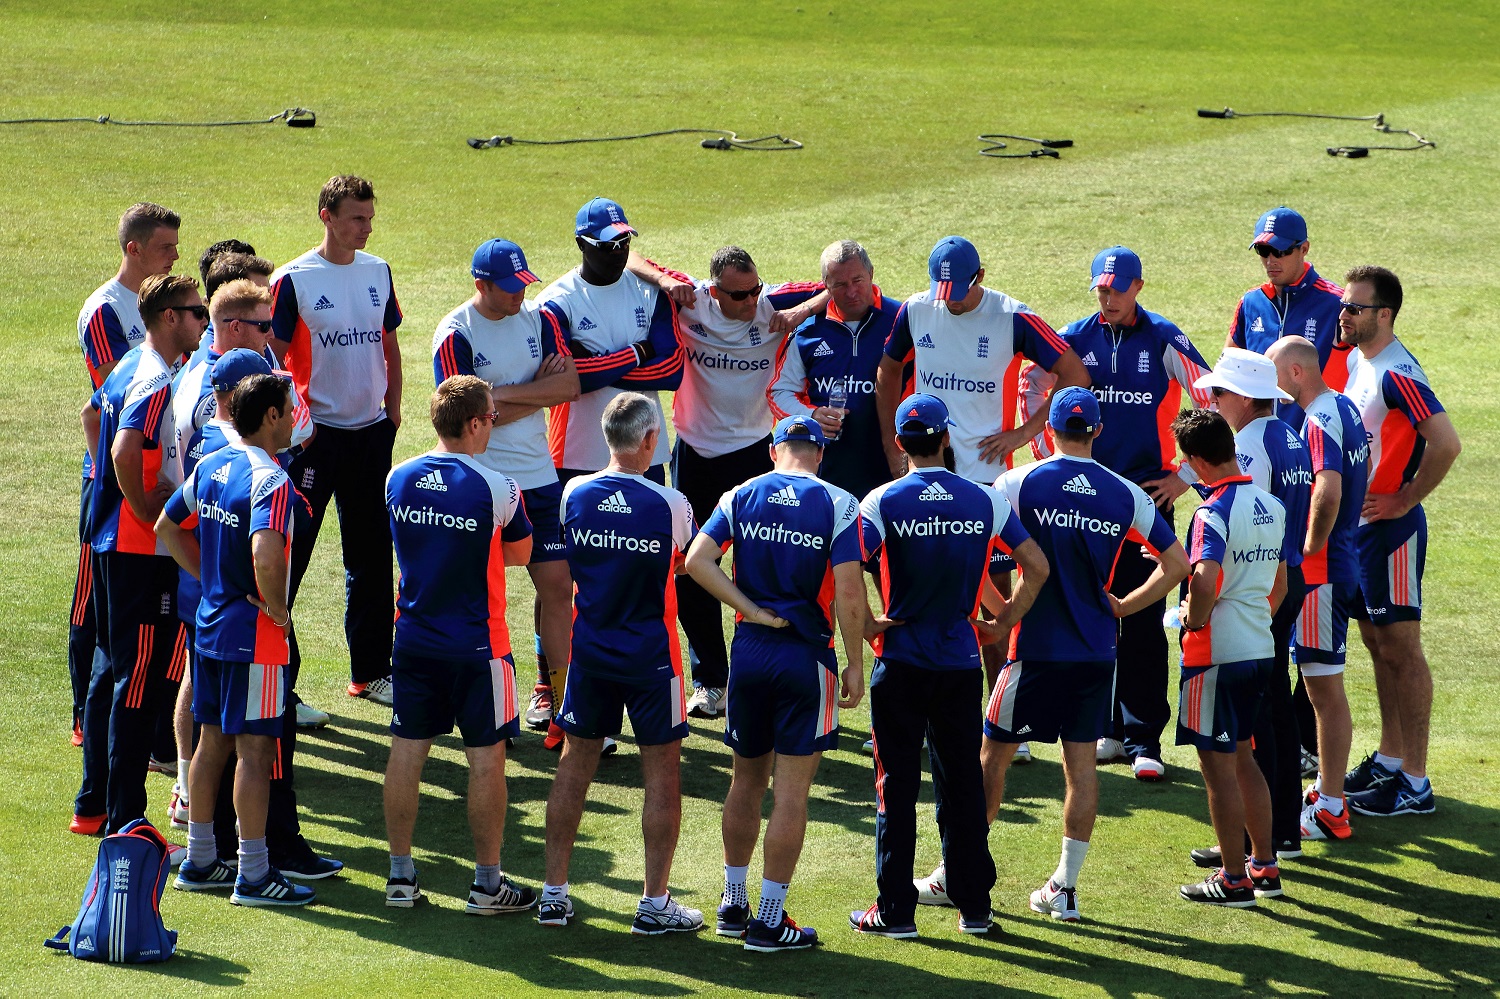 England spin consultant Patel says his players know it's going to spin in sub-continent